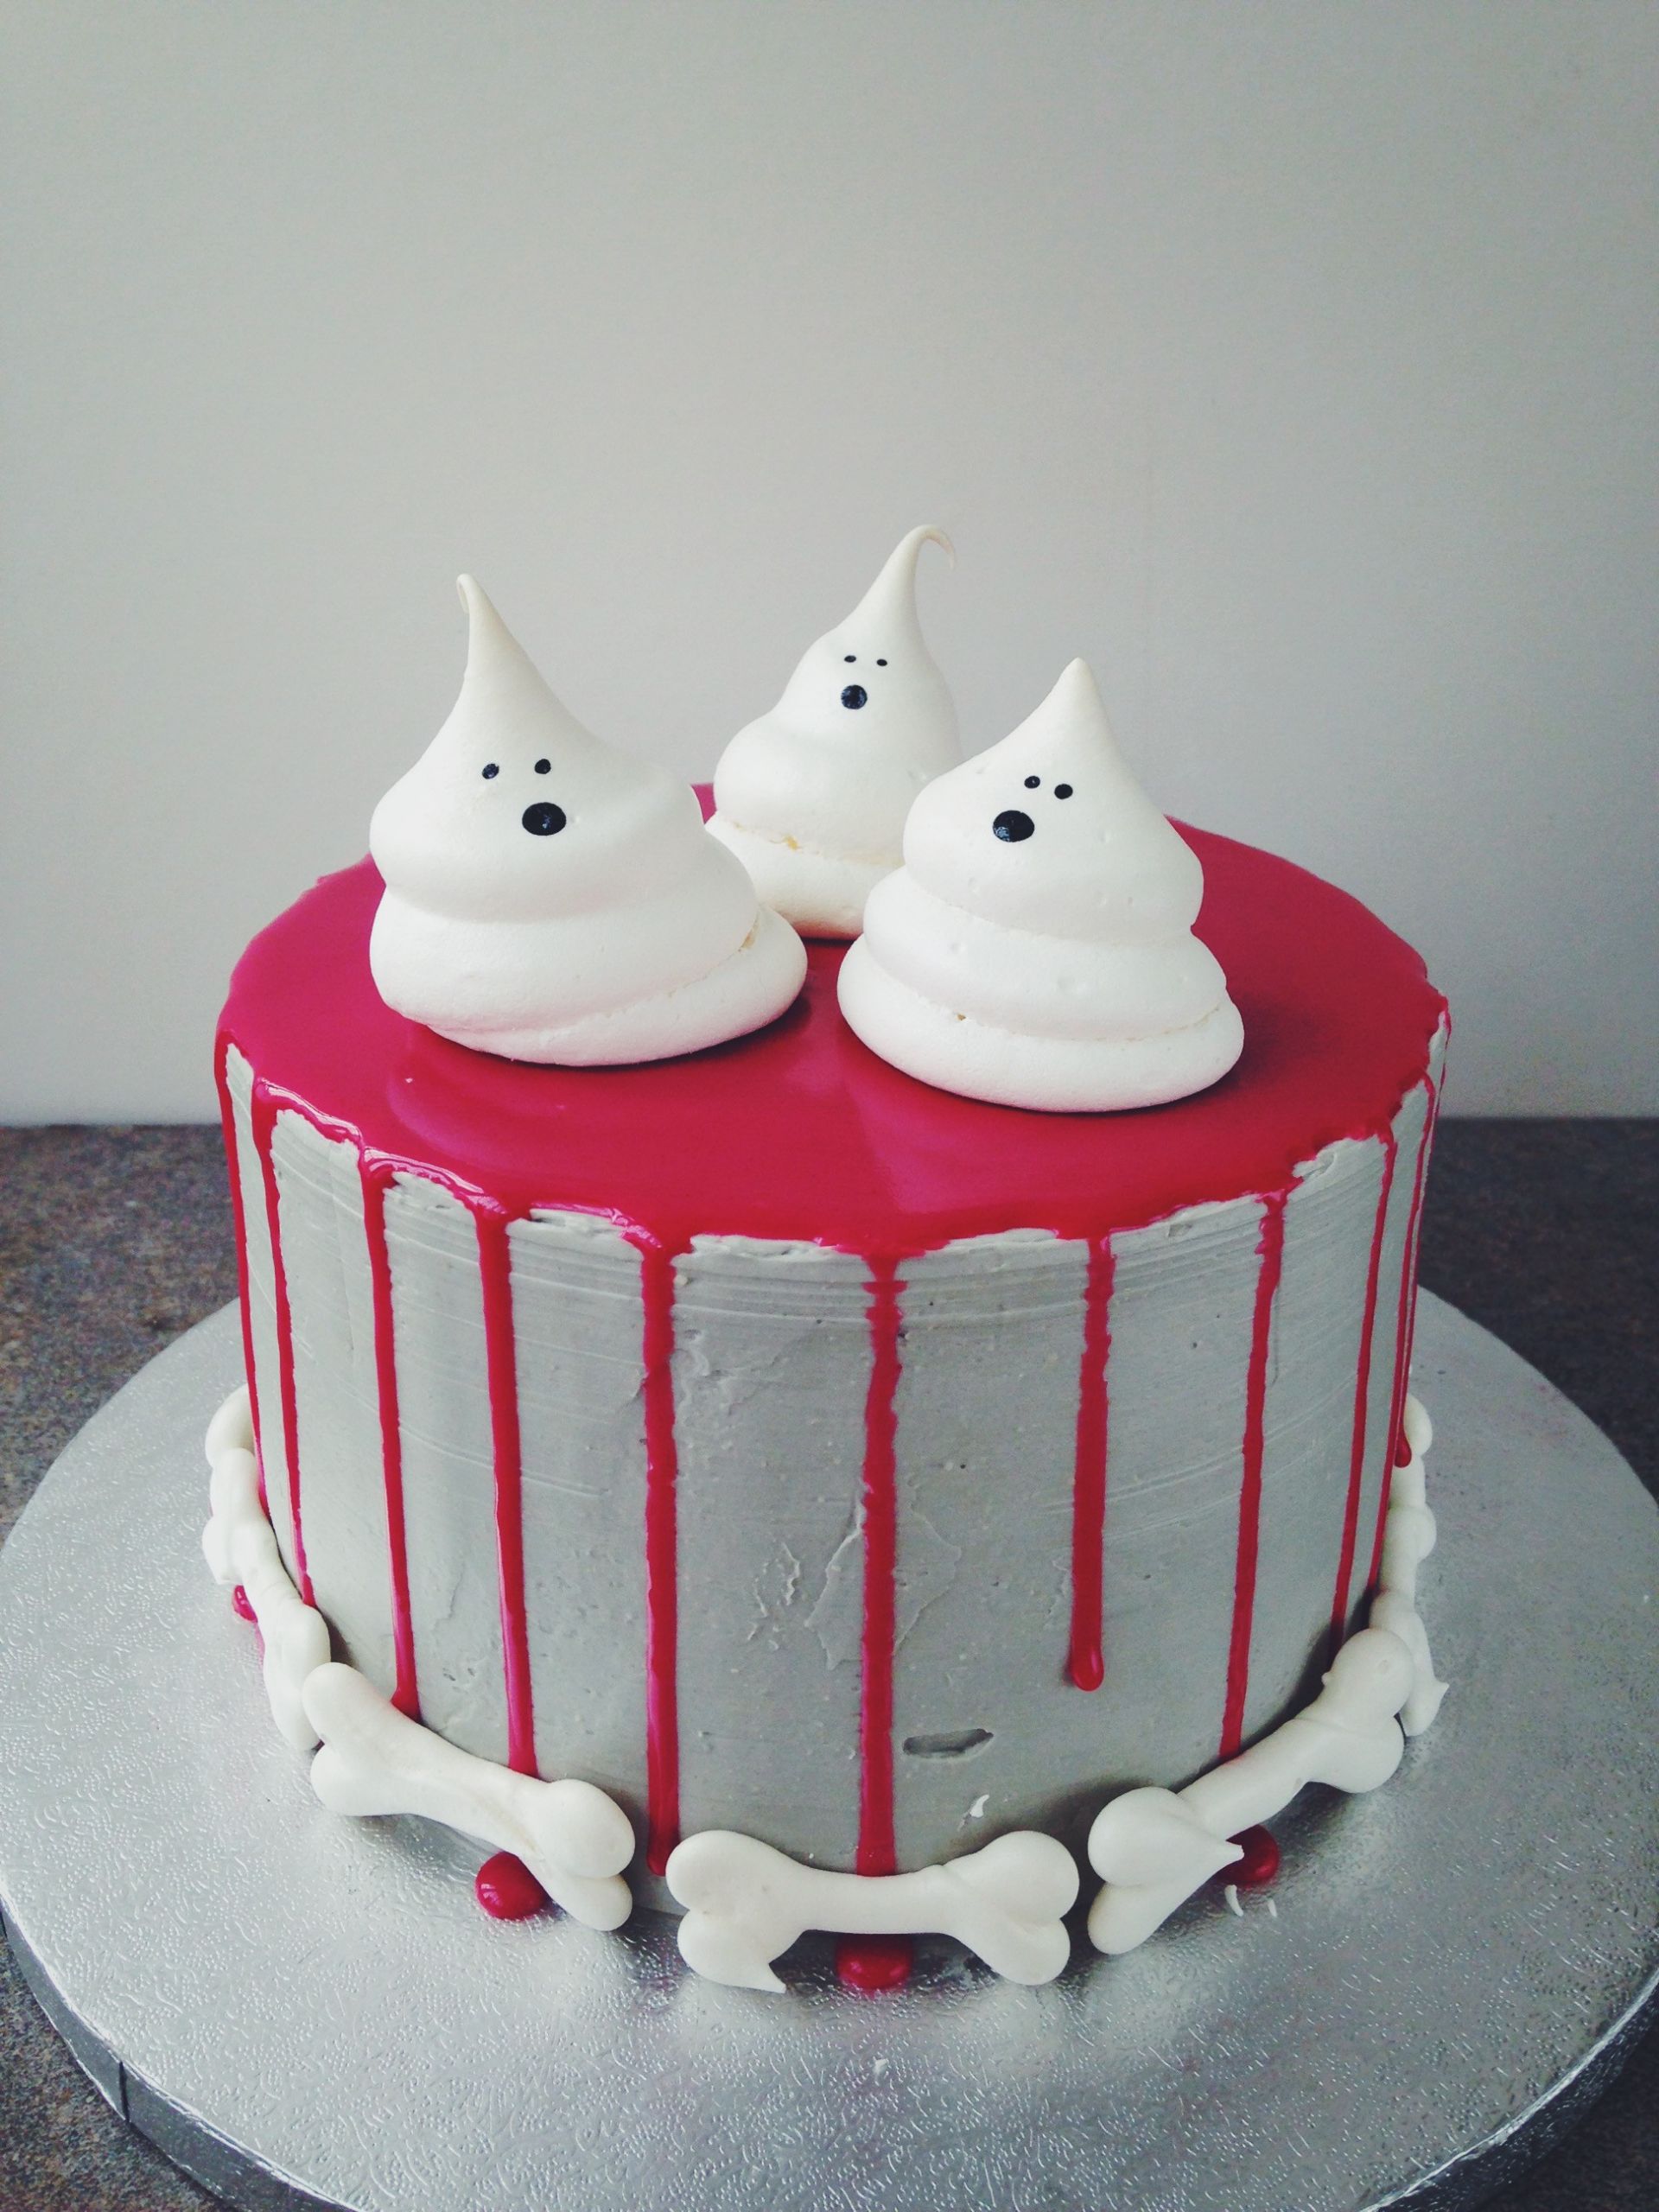 Spooky Halloween Cakes
 Spooky Halloween Blood Drip Cake with Meringue Ghosts and